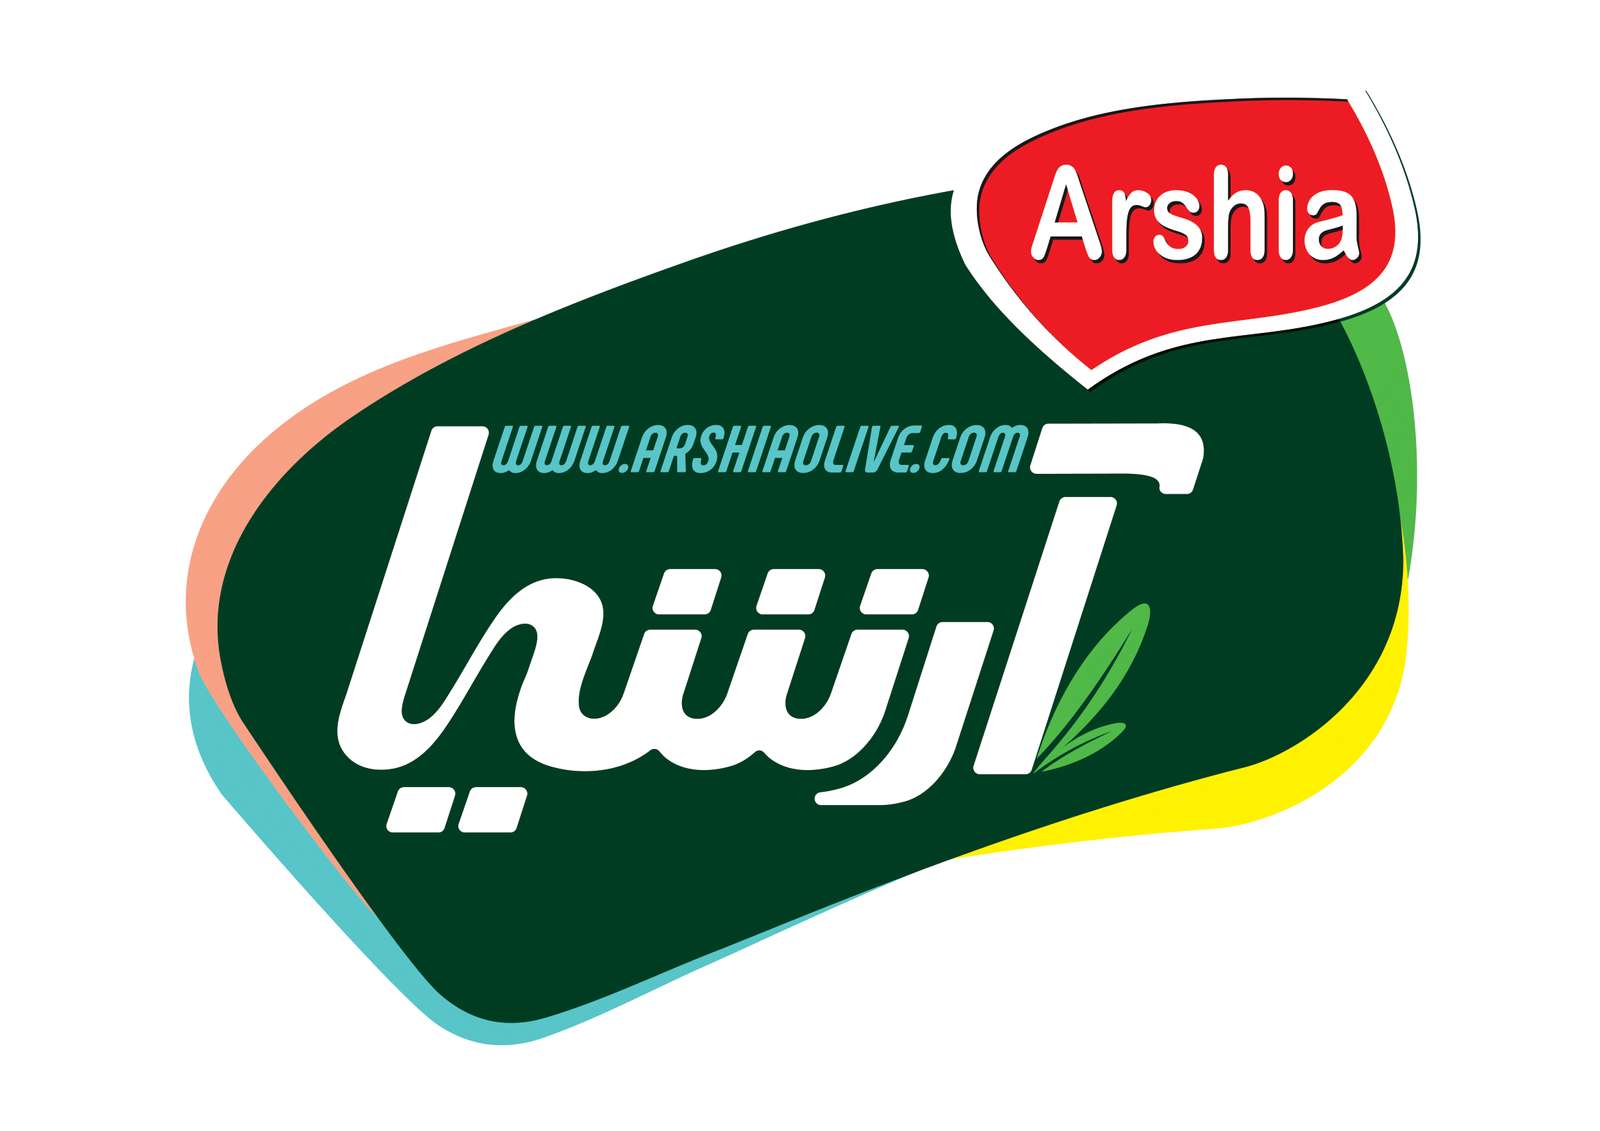 Arshia Olive Company Pussel online